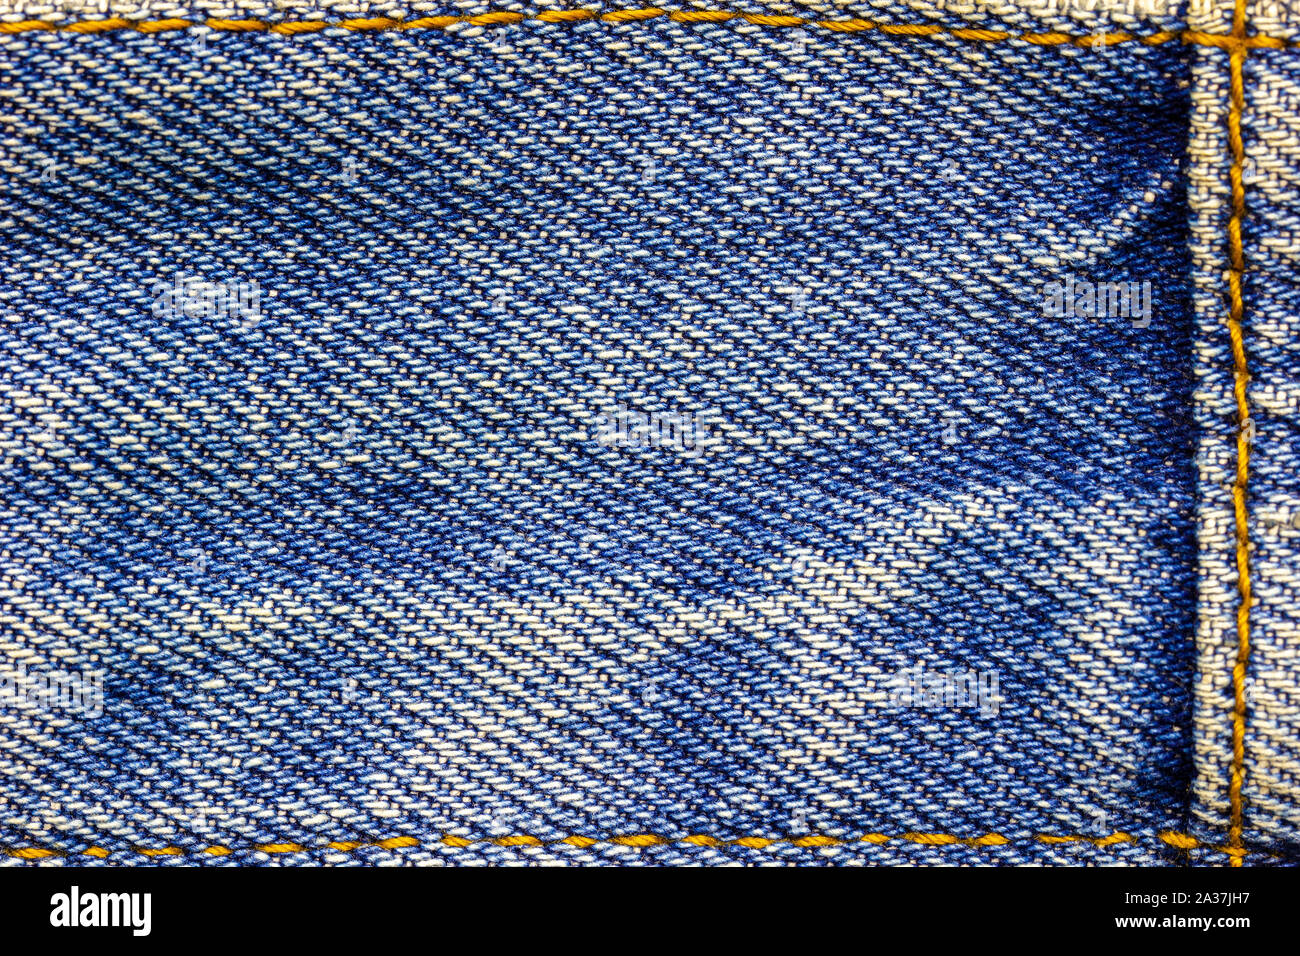 Frame or border of jeans fabric stitch. Concept of vintage clothes or fashion. Stock Photo